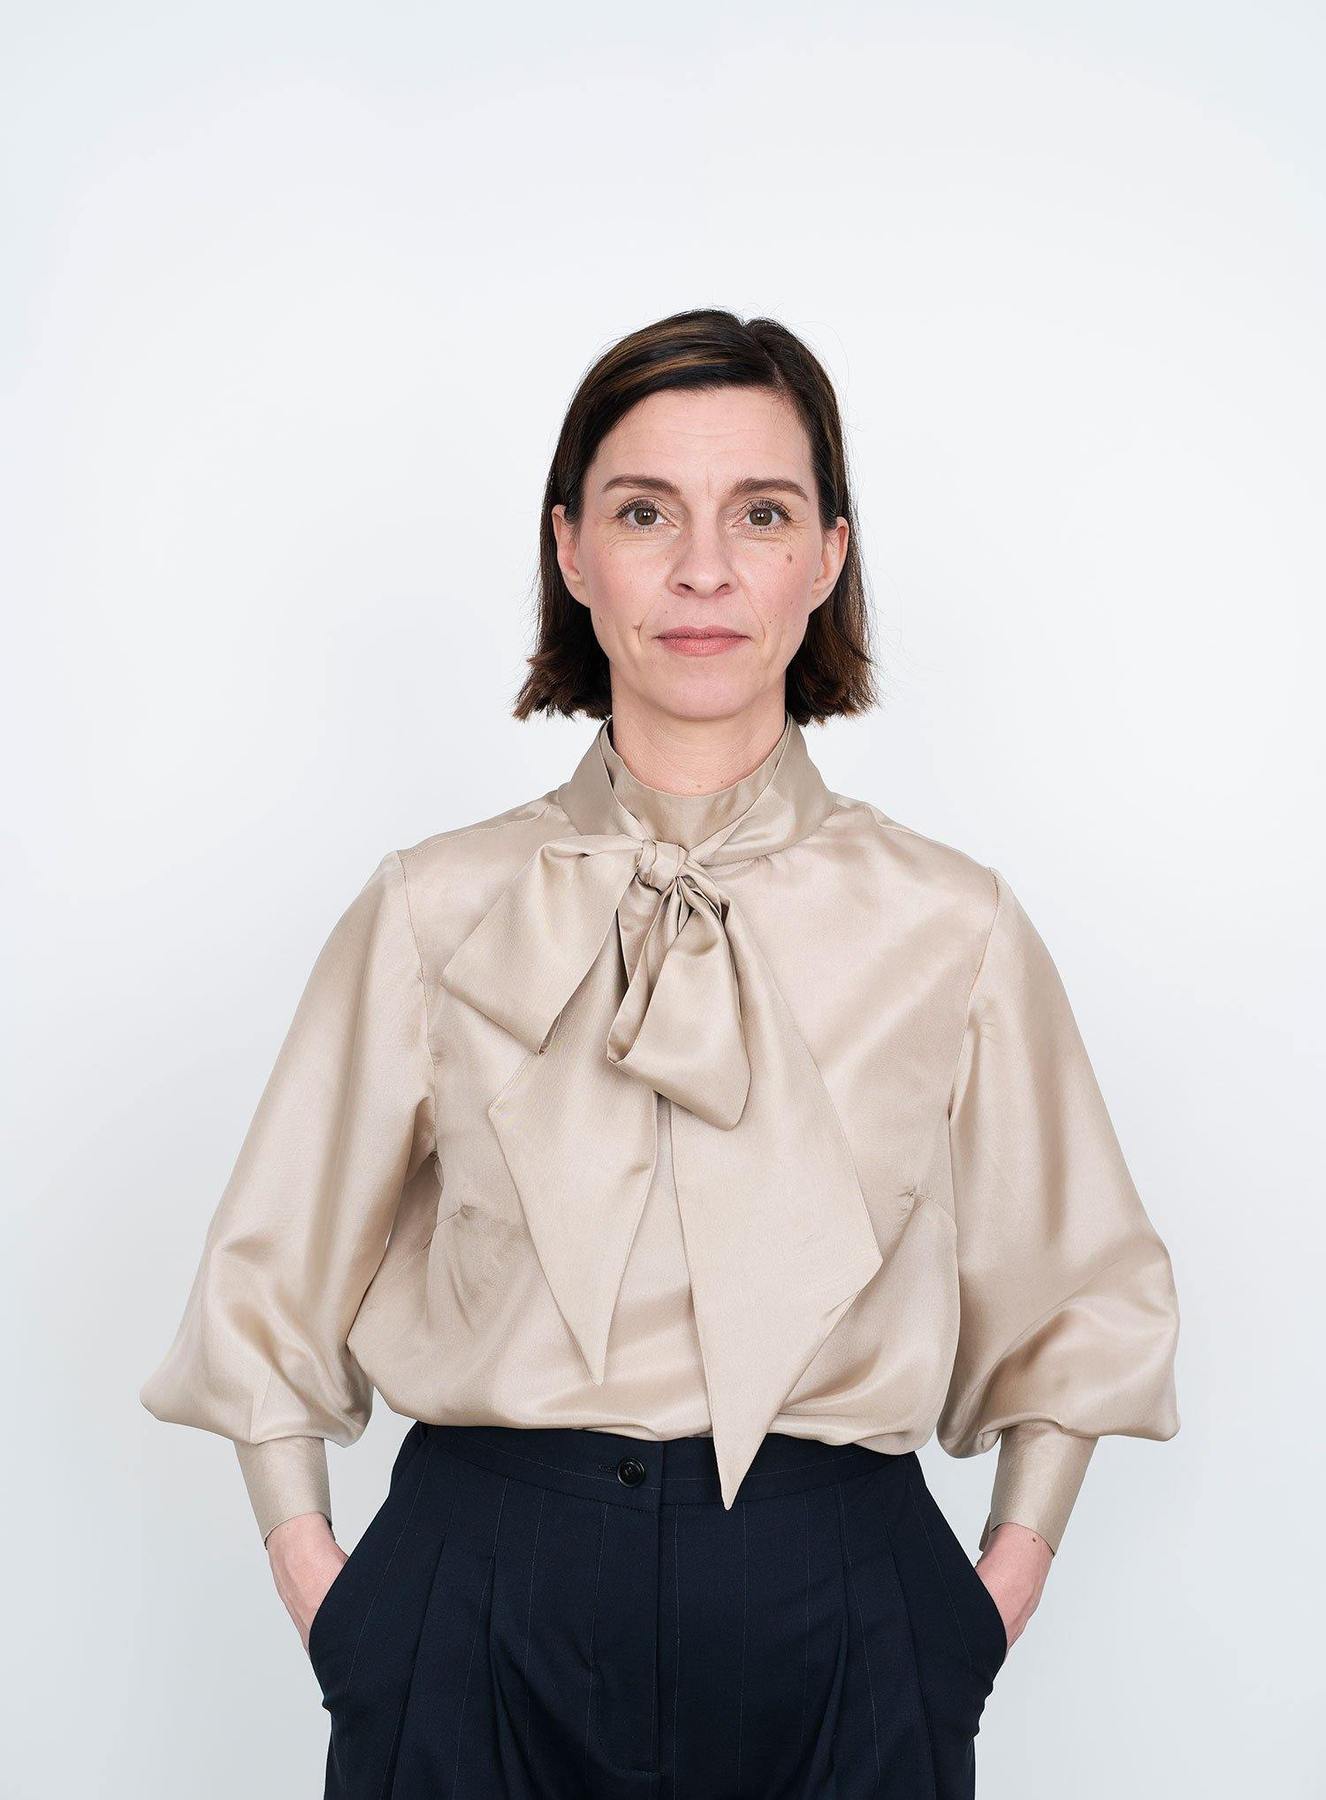 Tie Bow Blouse - The Assembly Line - MaaiDesign